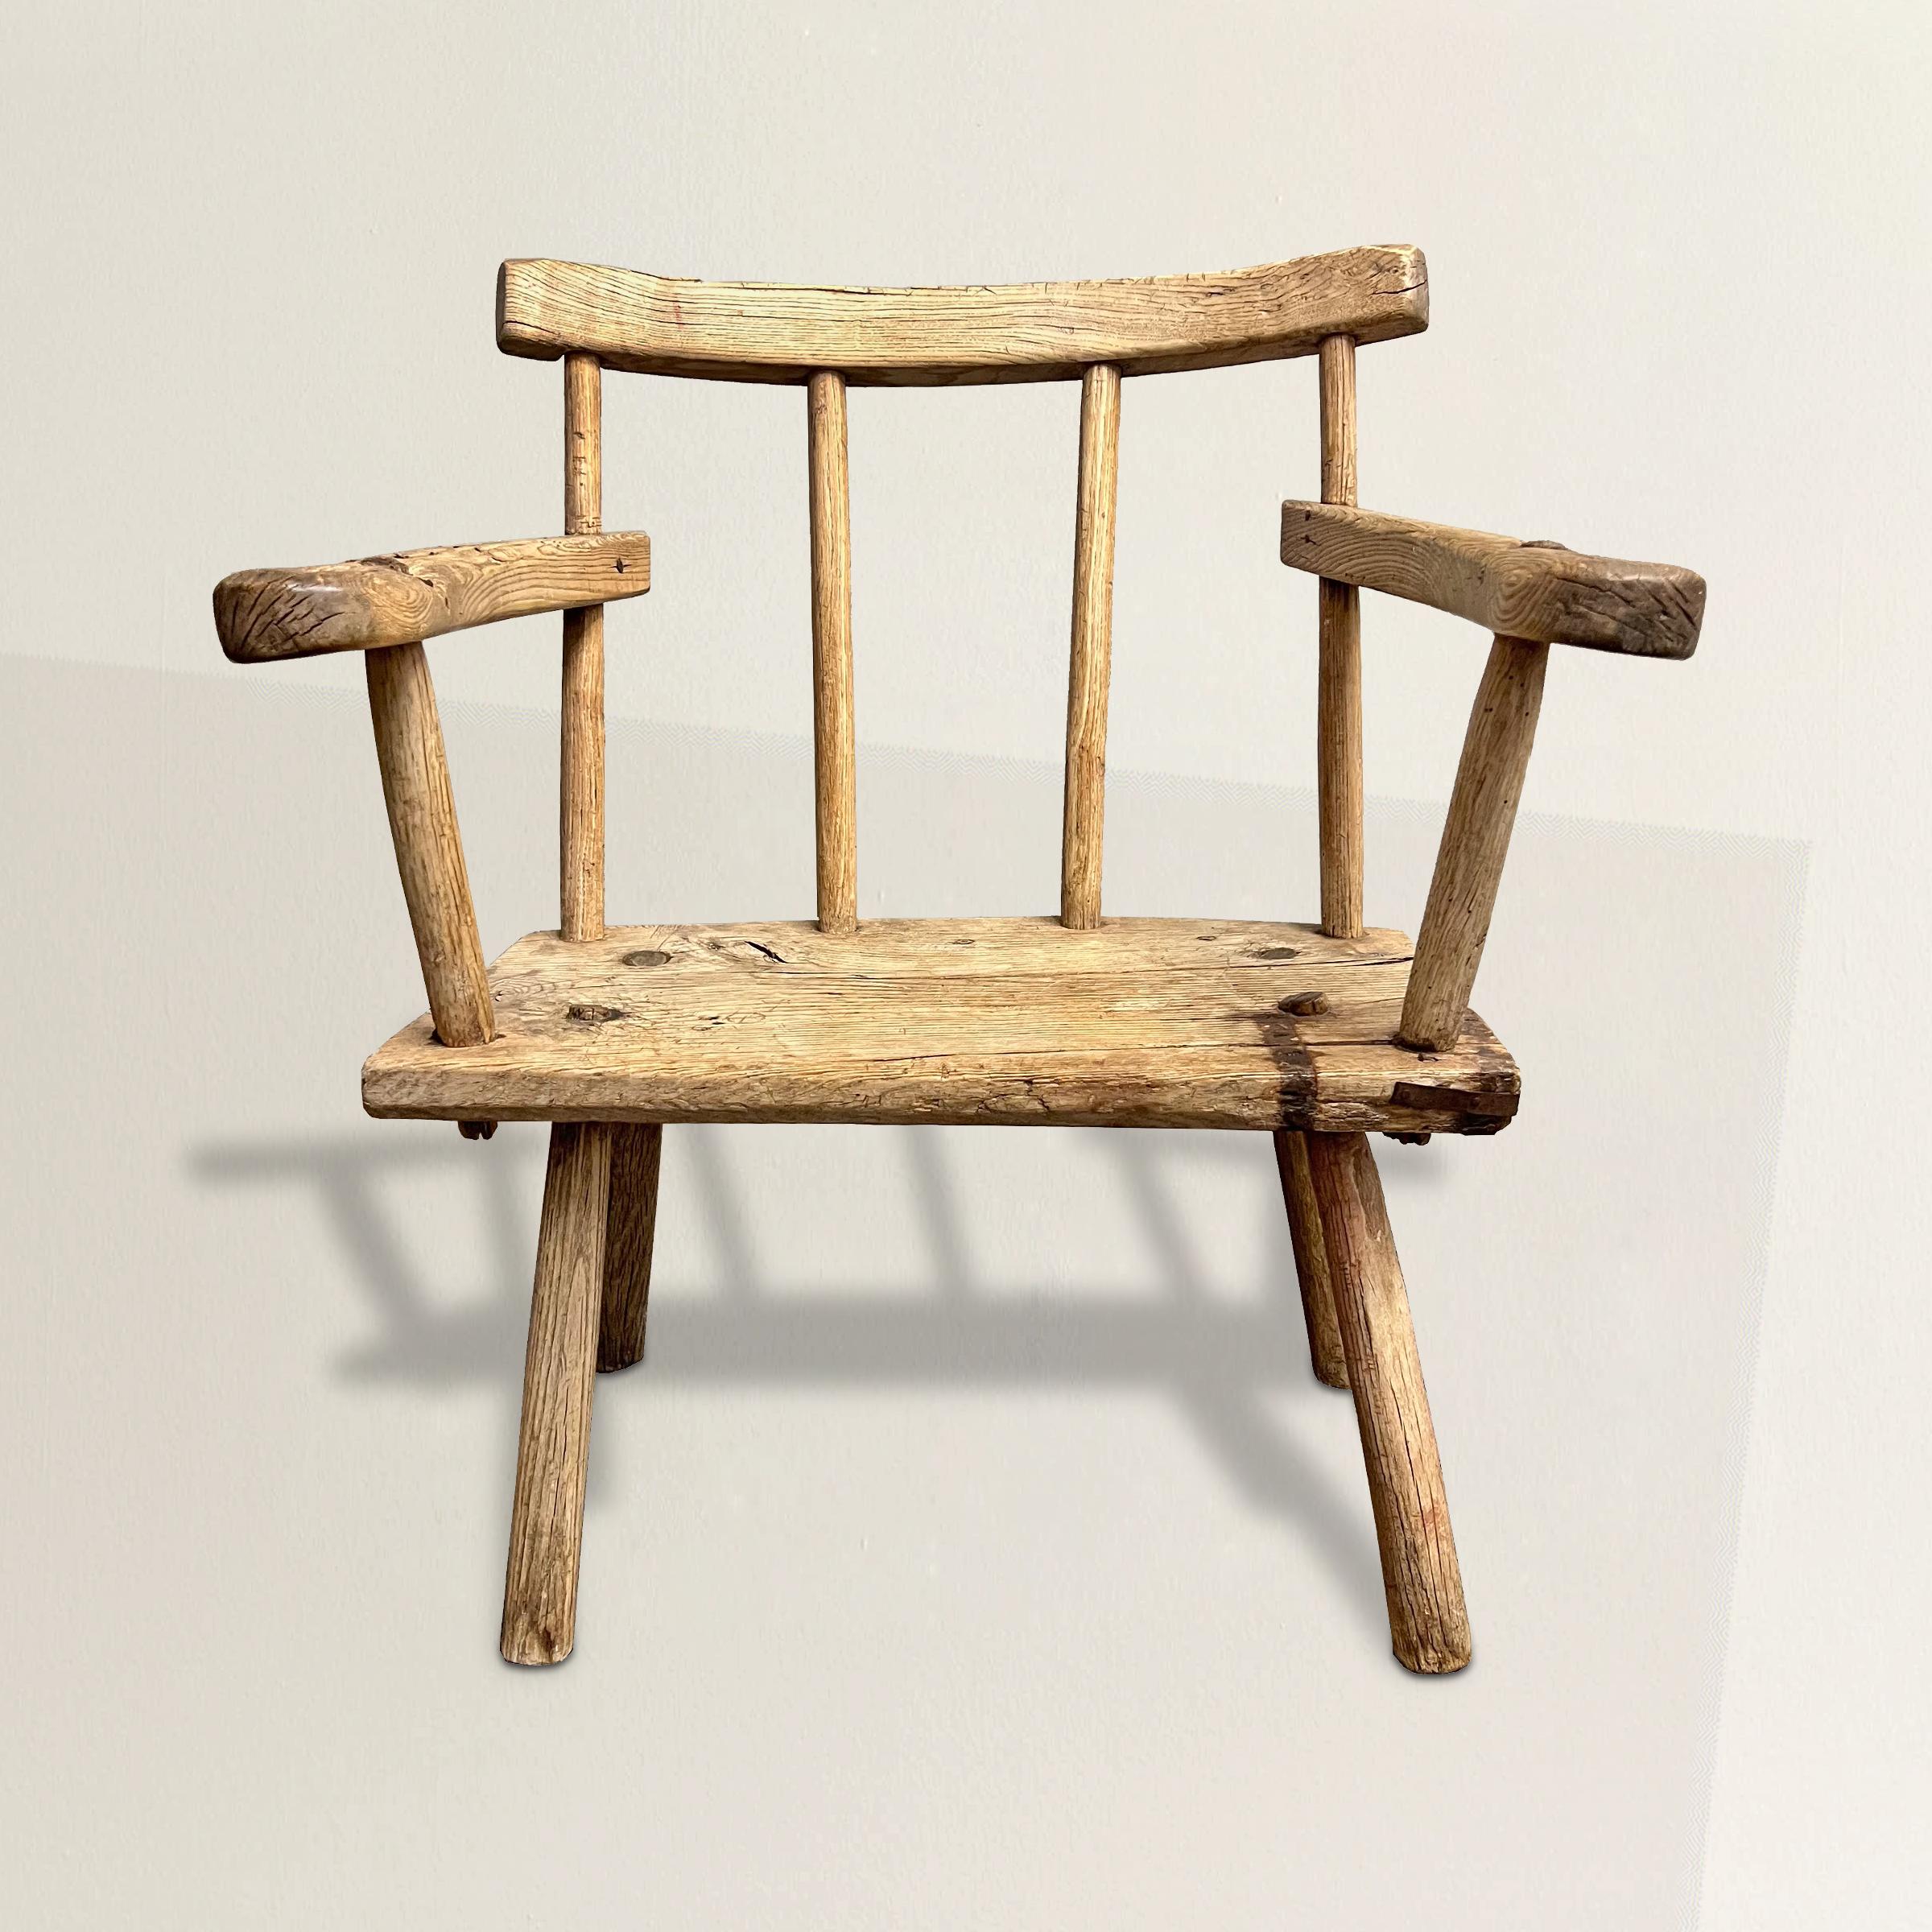 Step into the rustic elegance of this 18th-century Irish ash hedge chair, a remarkable embodiment of Ireland's rich heritage and the ingenuity of its craftsmen. A true hedge chair has roots in traditional folk art being constructed from found